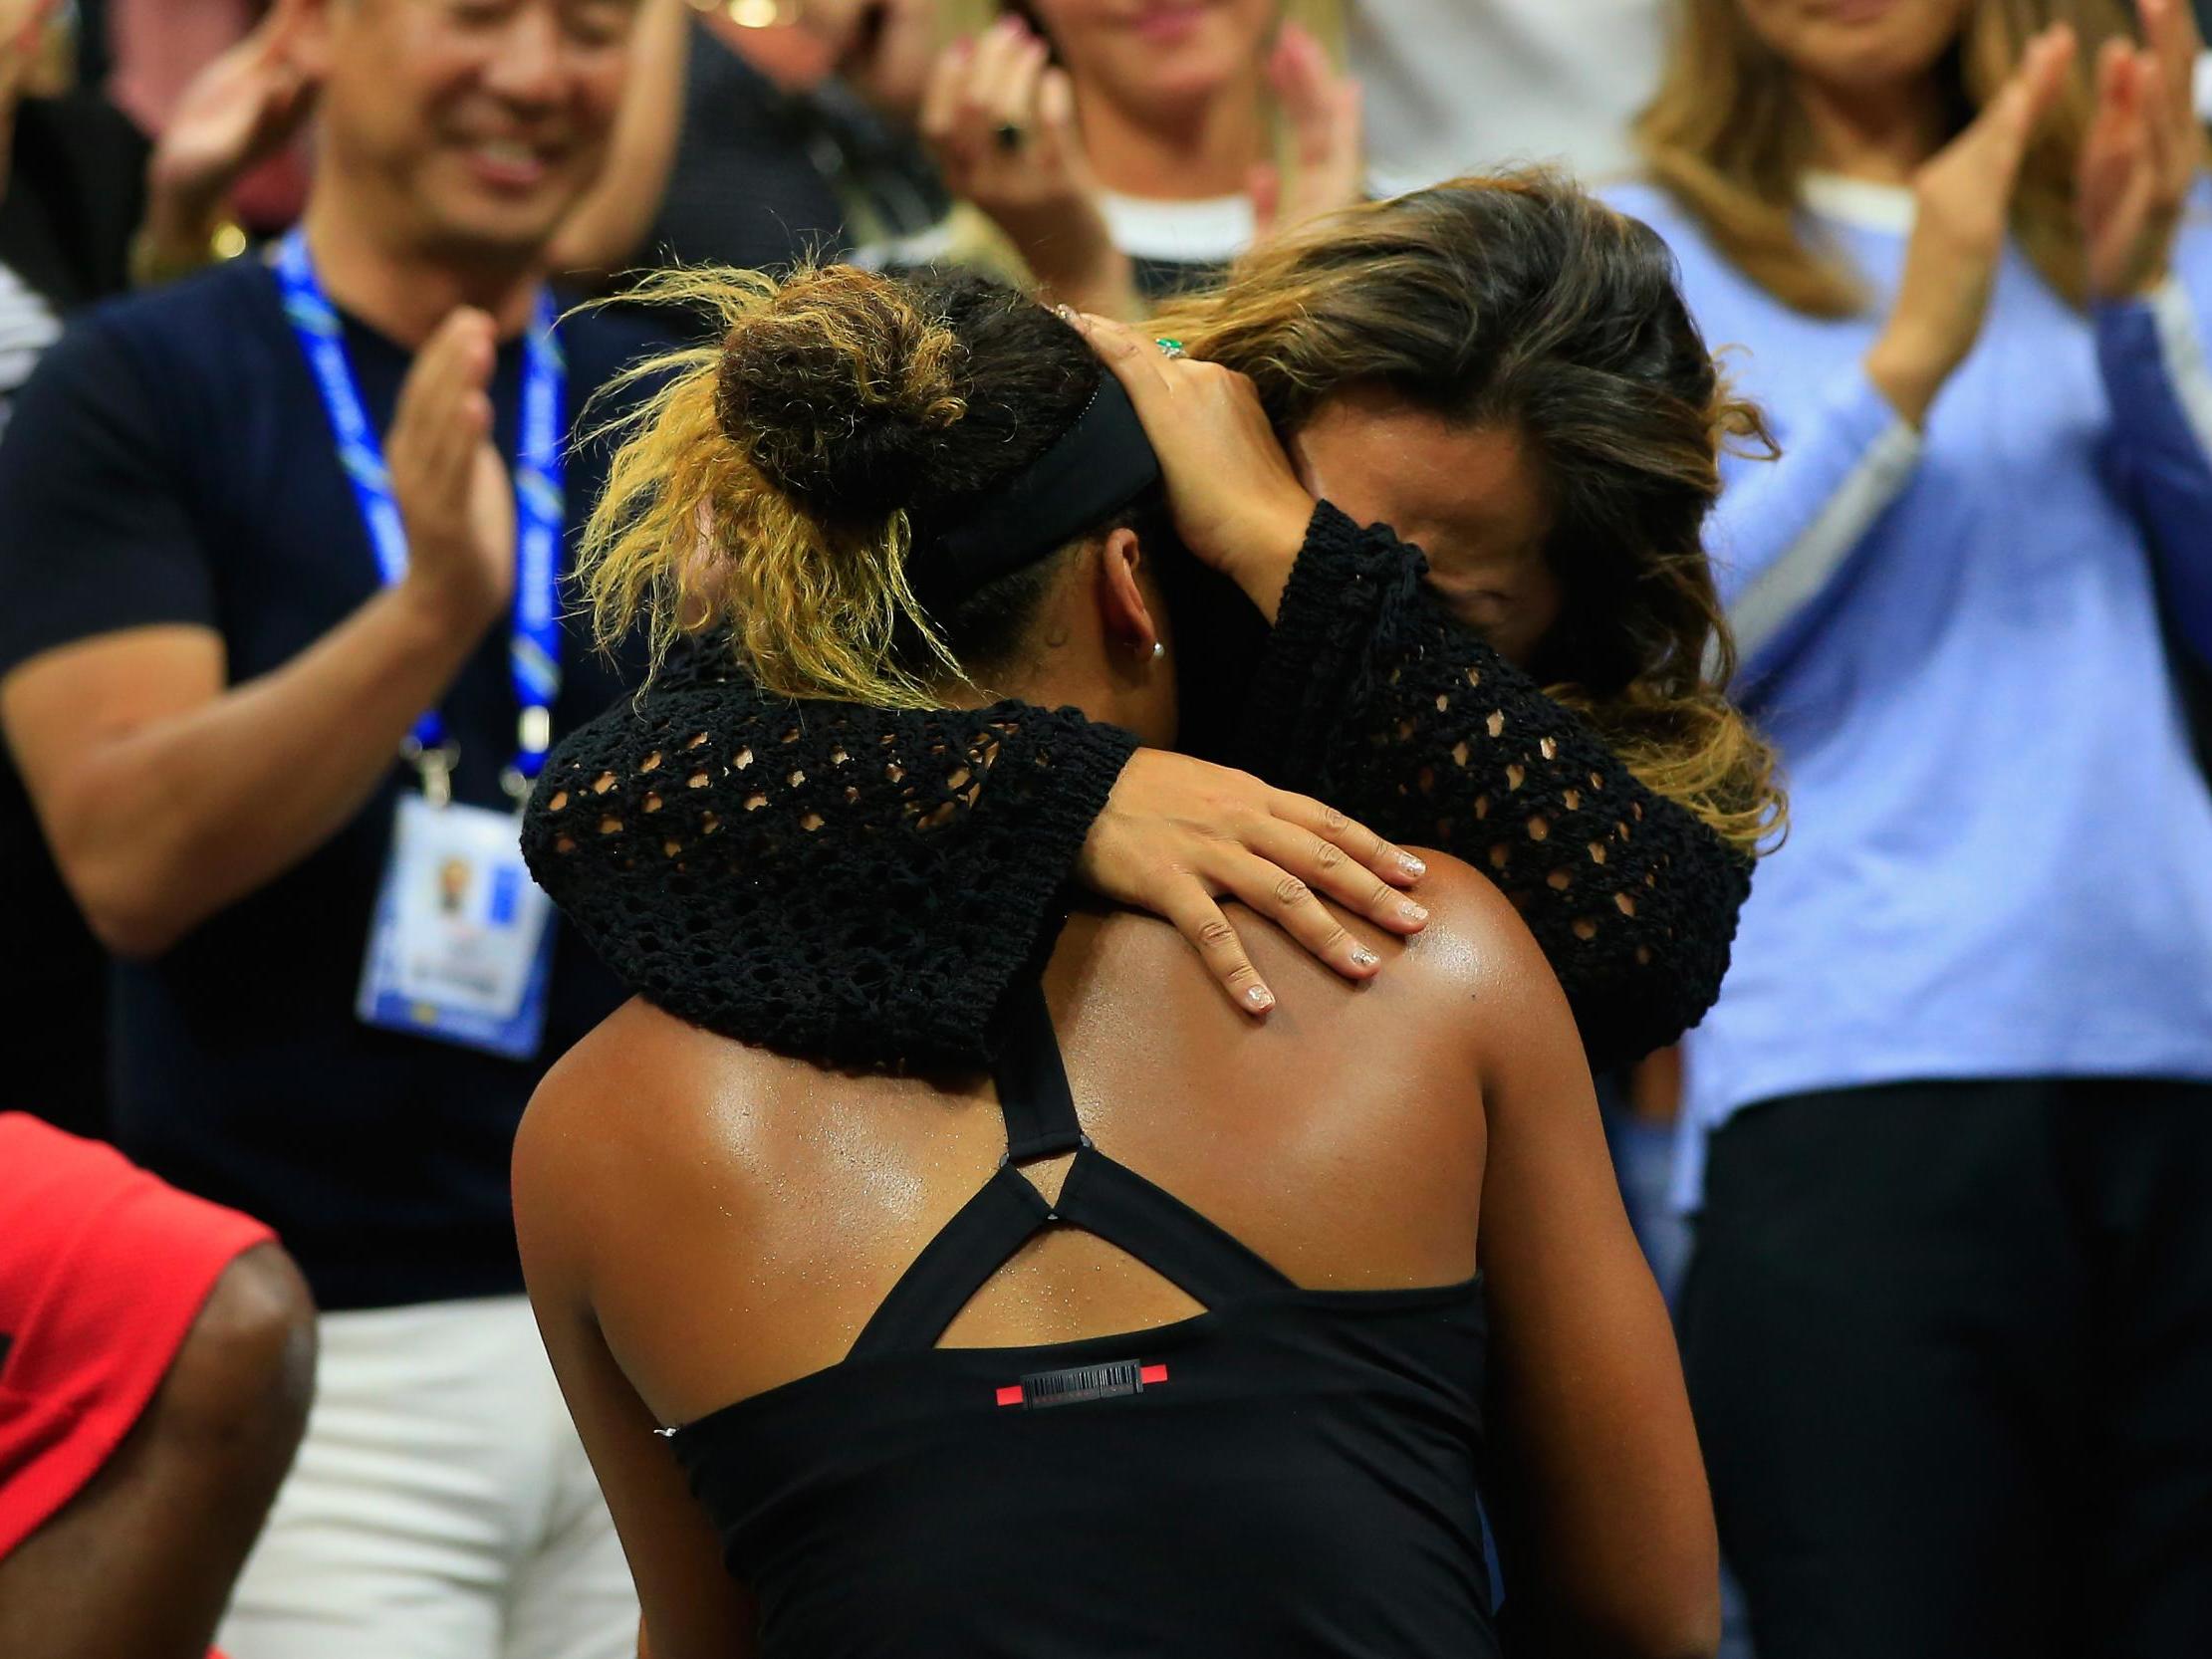 Osaka's emotions came pouring out during the ceremony